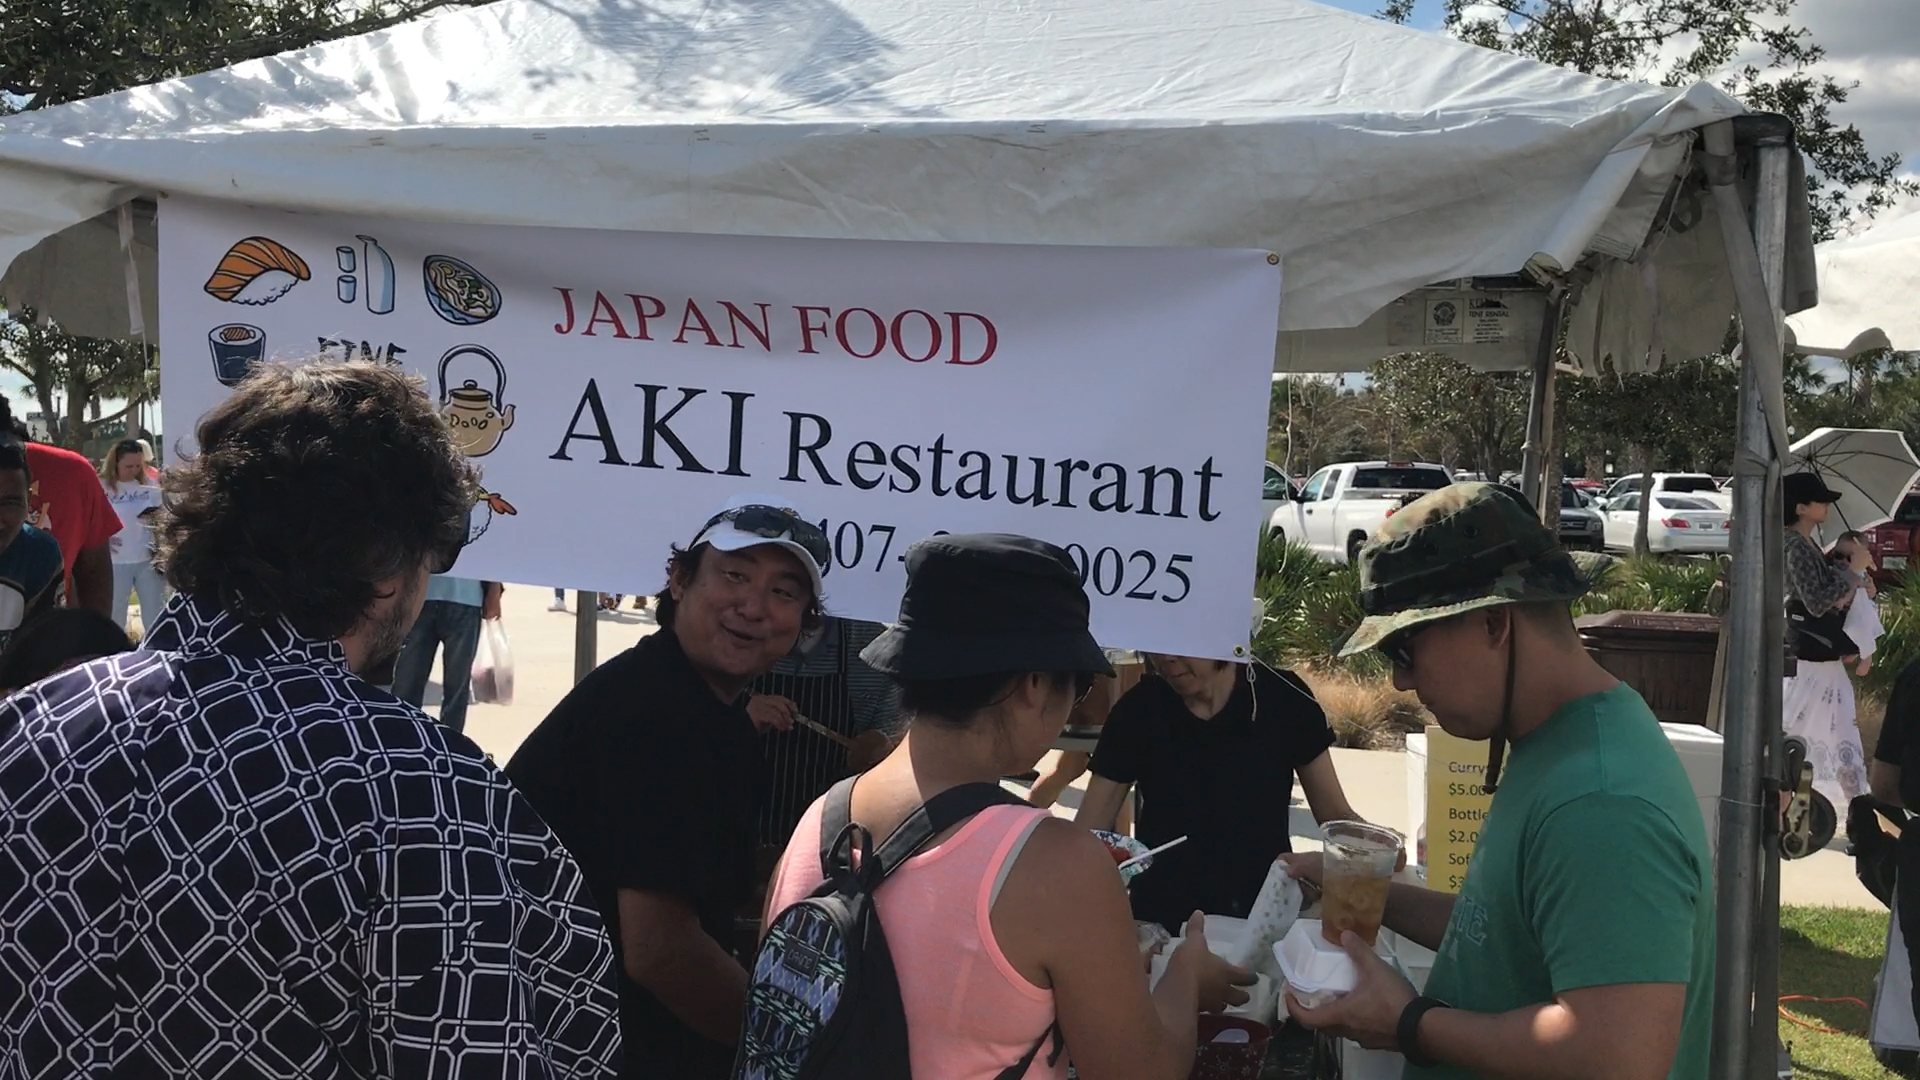 Aki Japanese Restaurant - JAO Orlando Japan Festival Review YouTube Video 2017 Lots of Fun Every Year